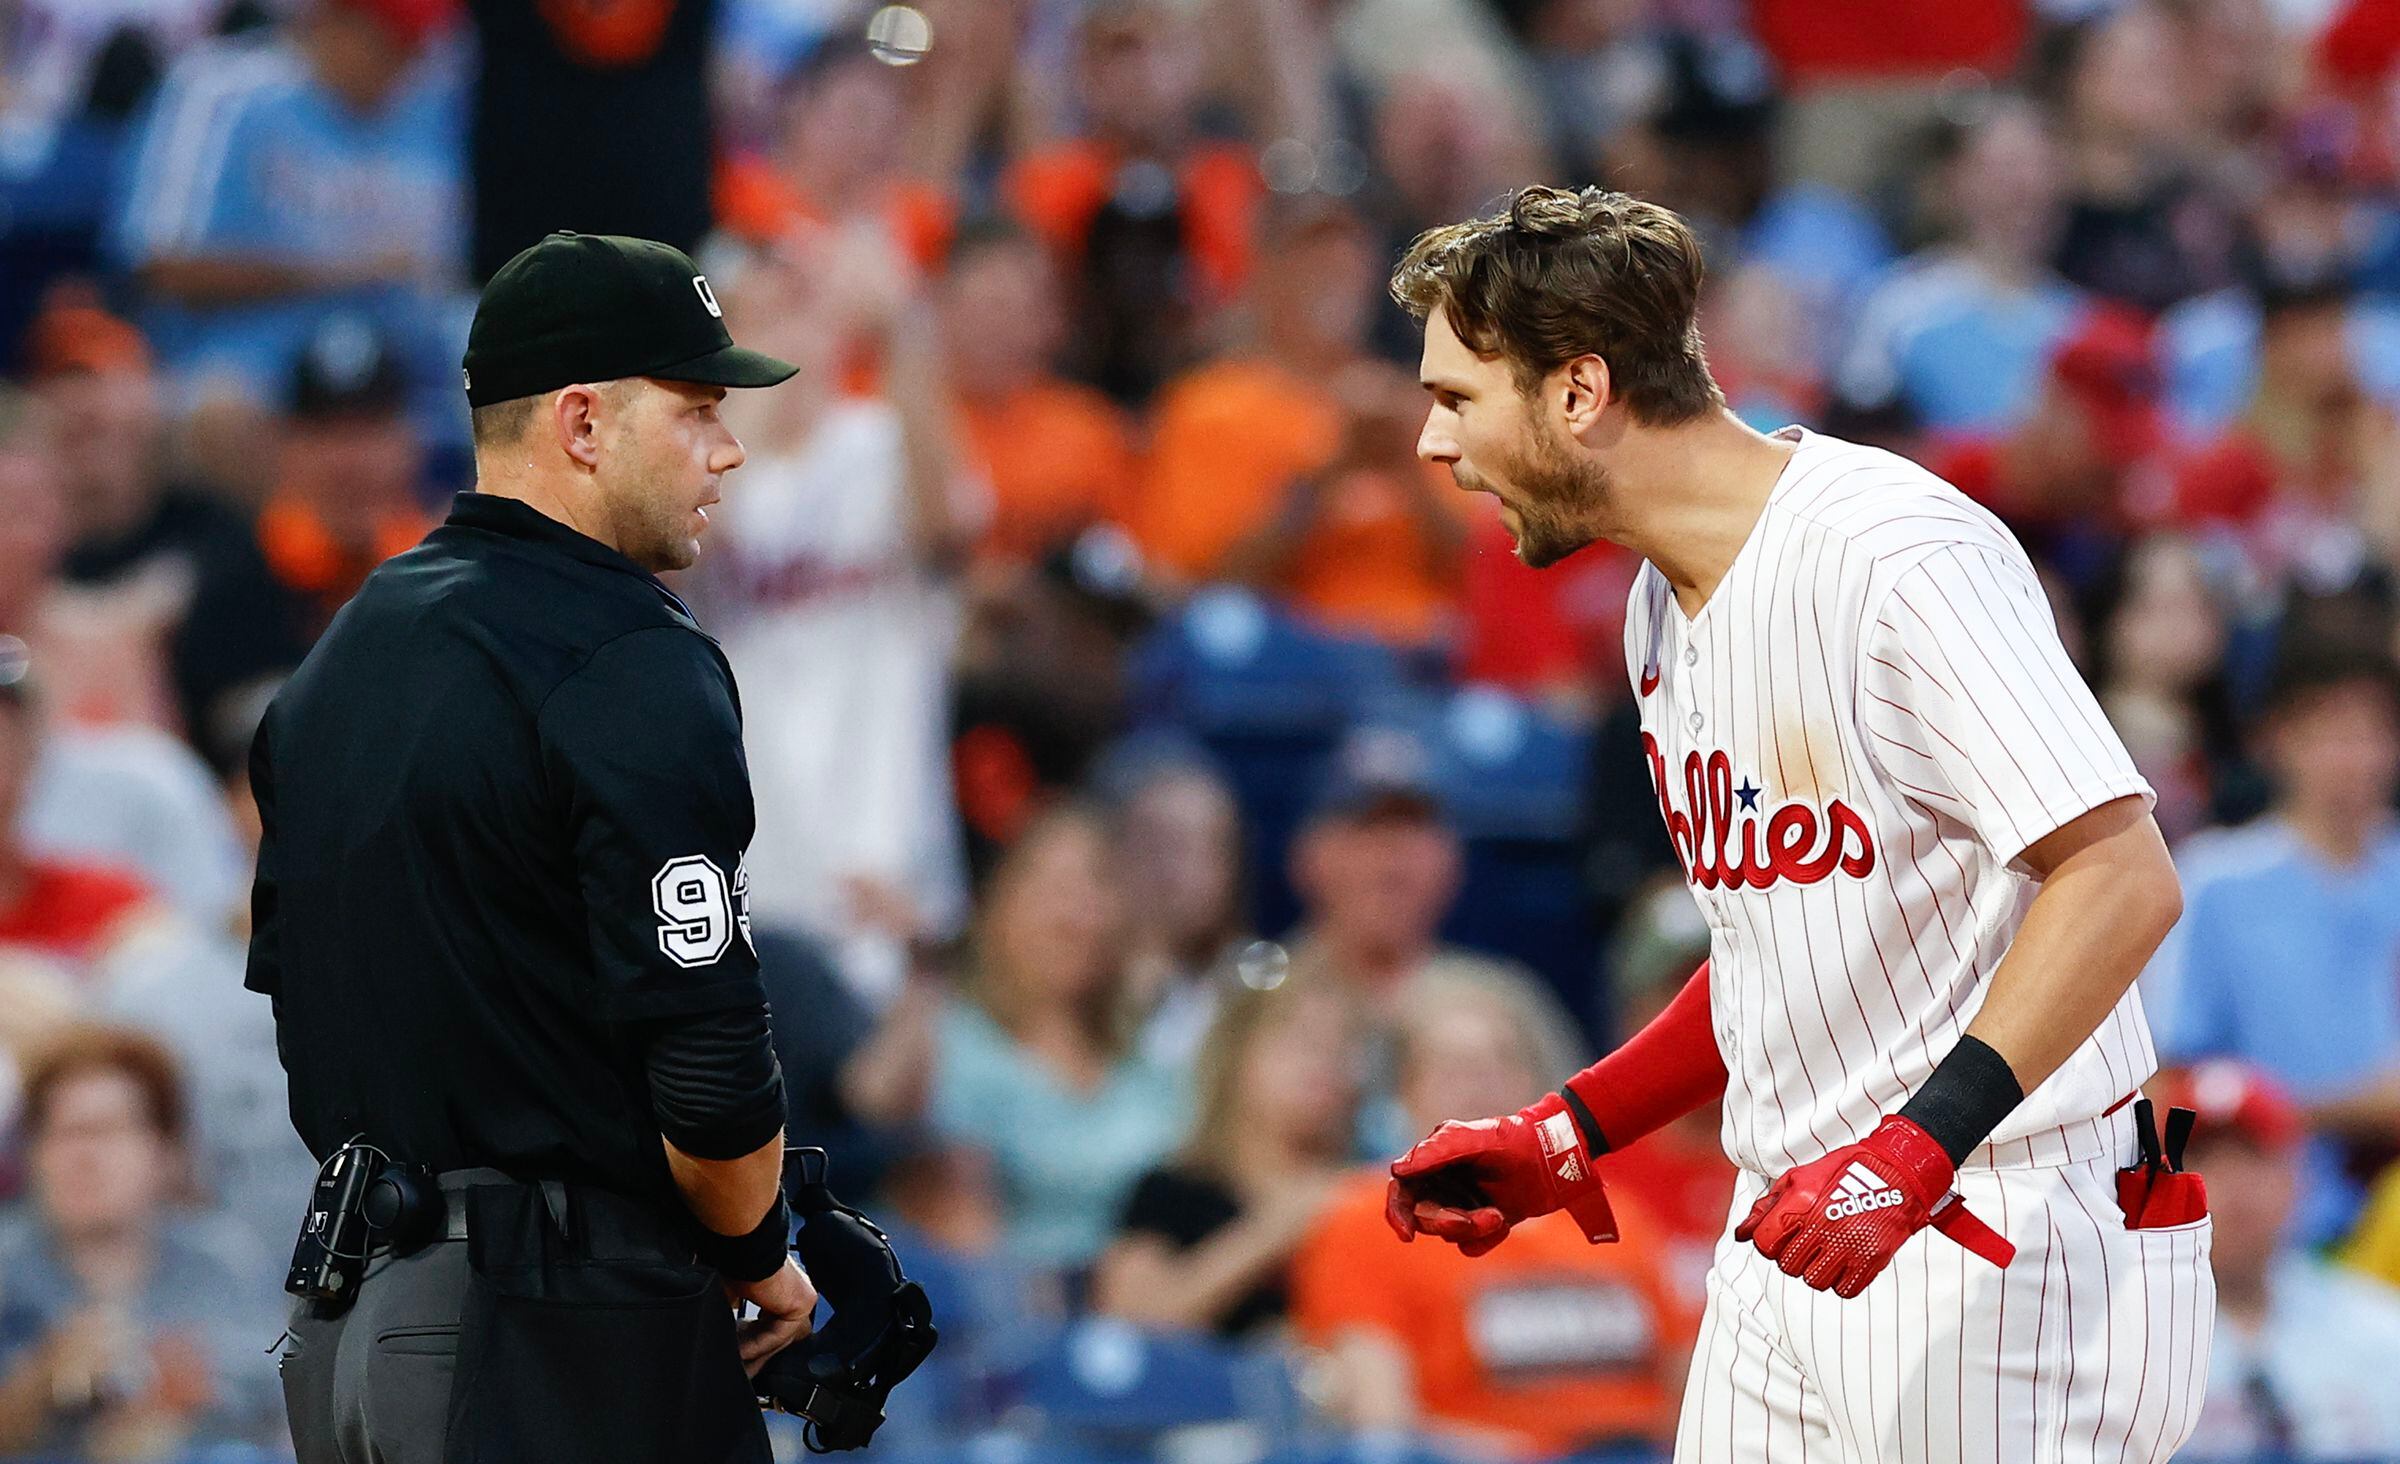 Phillies end 9-game skid, top Orioles 2-1 – thereporteronline